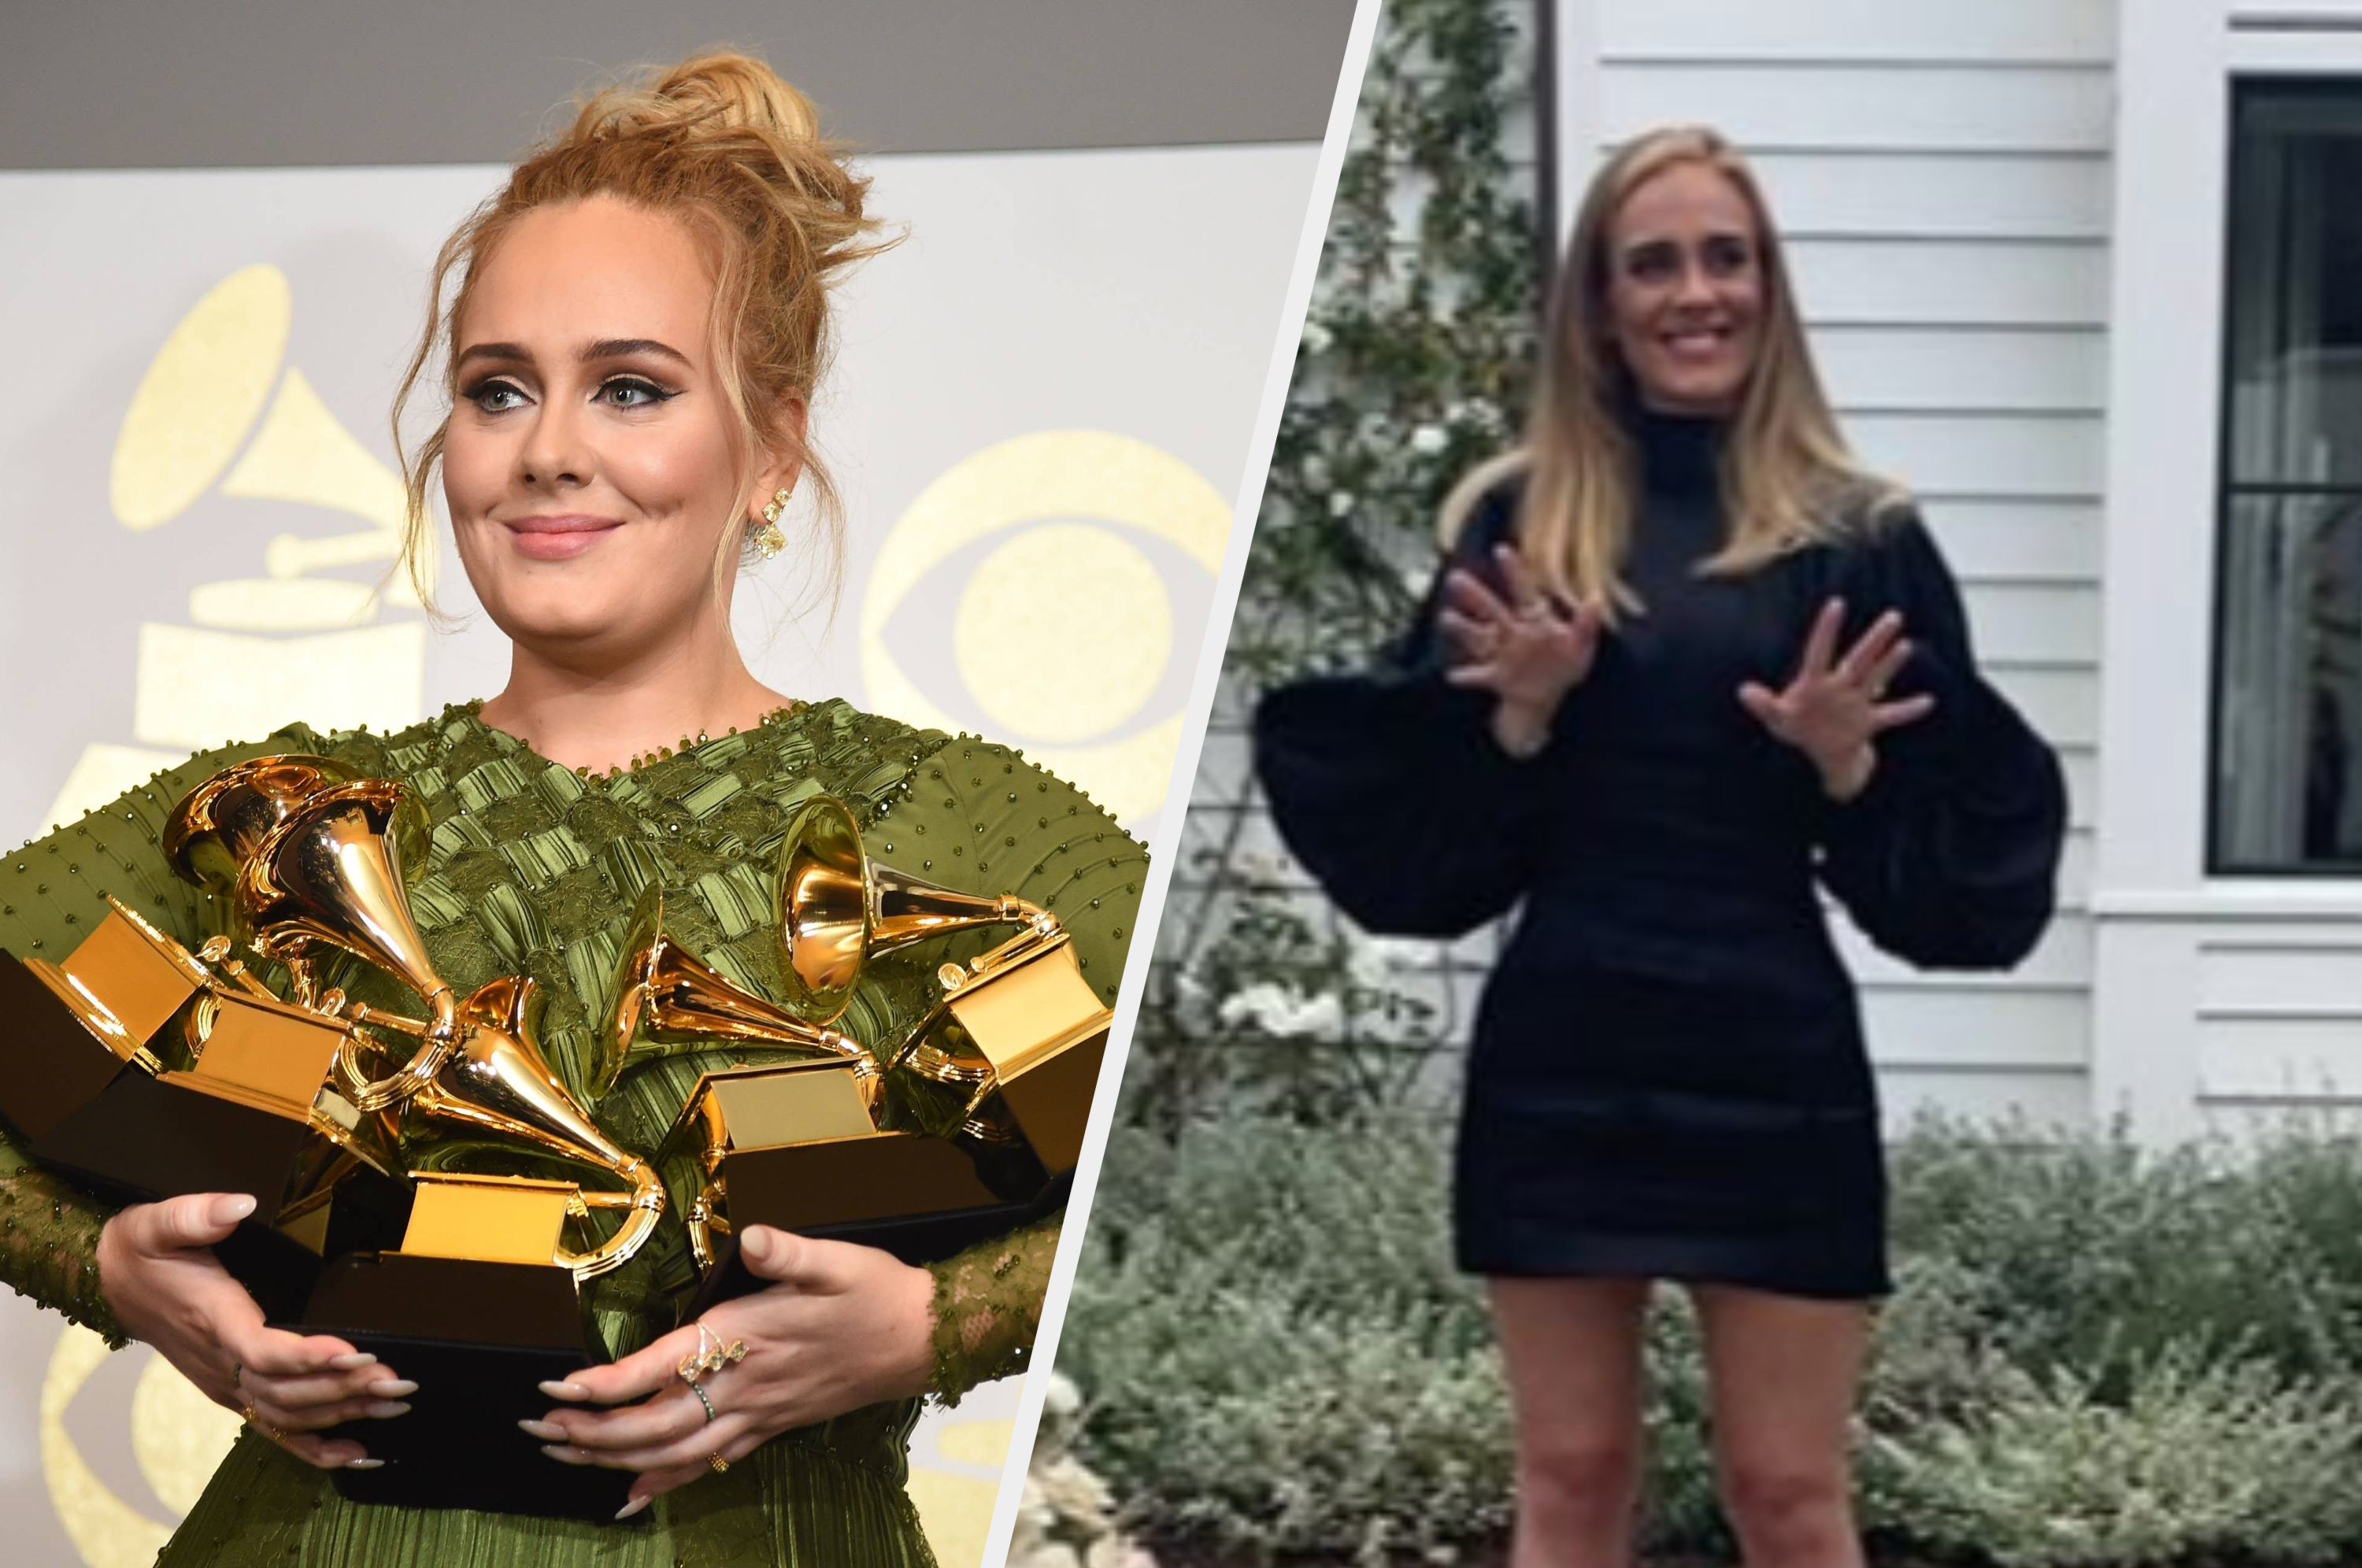 Adele's Weight Loss Is A Double Bind